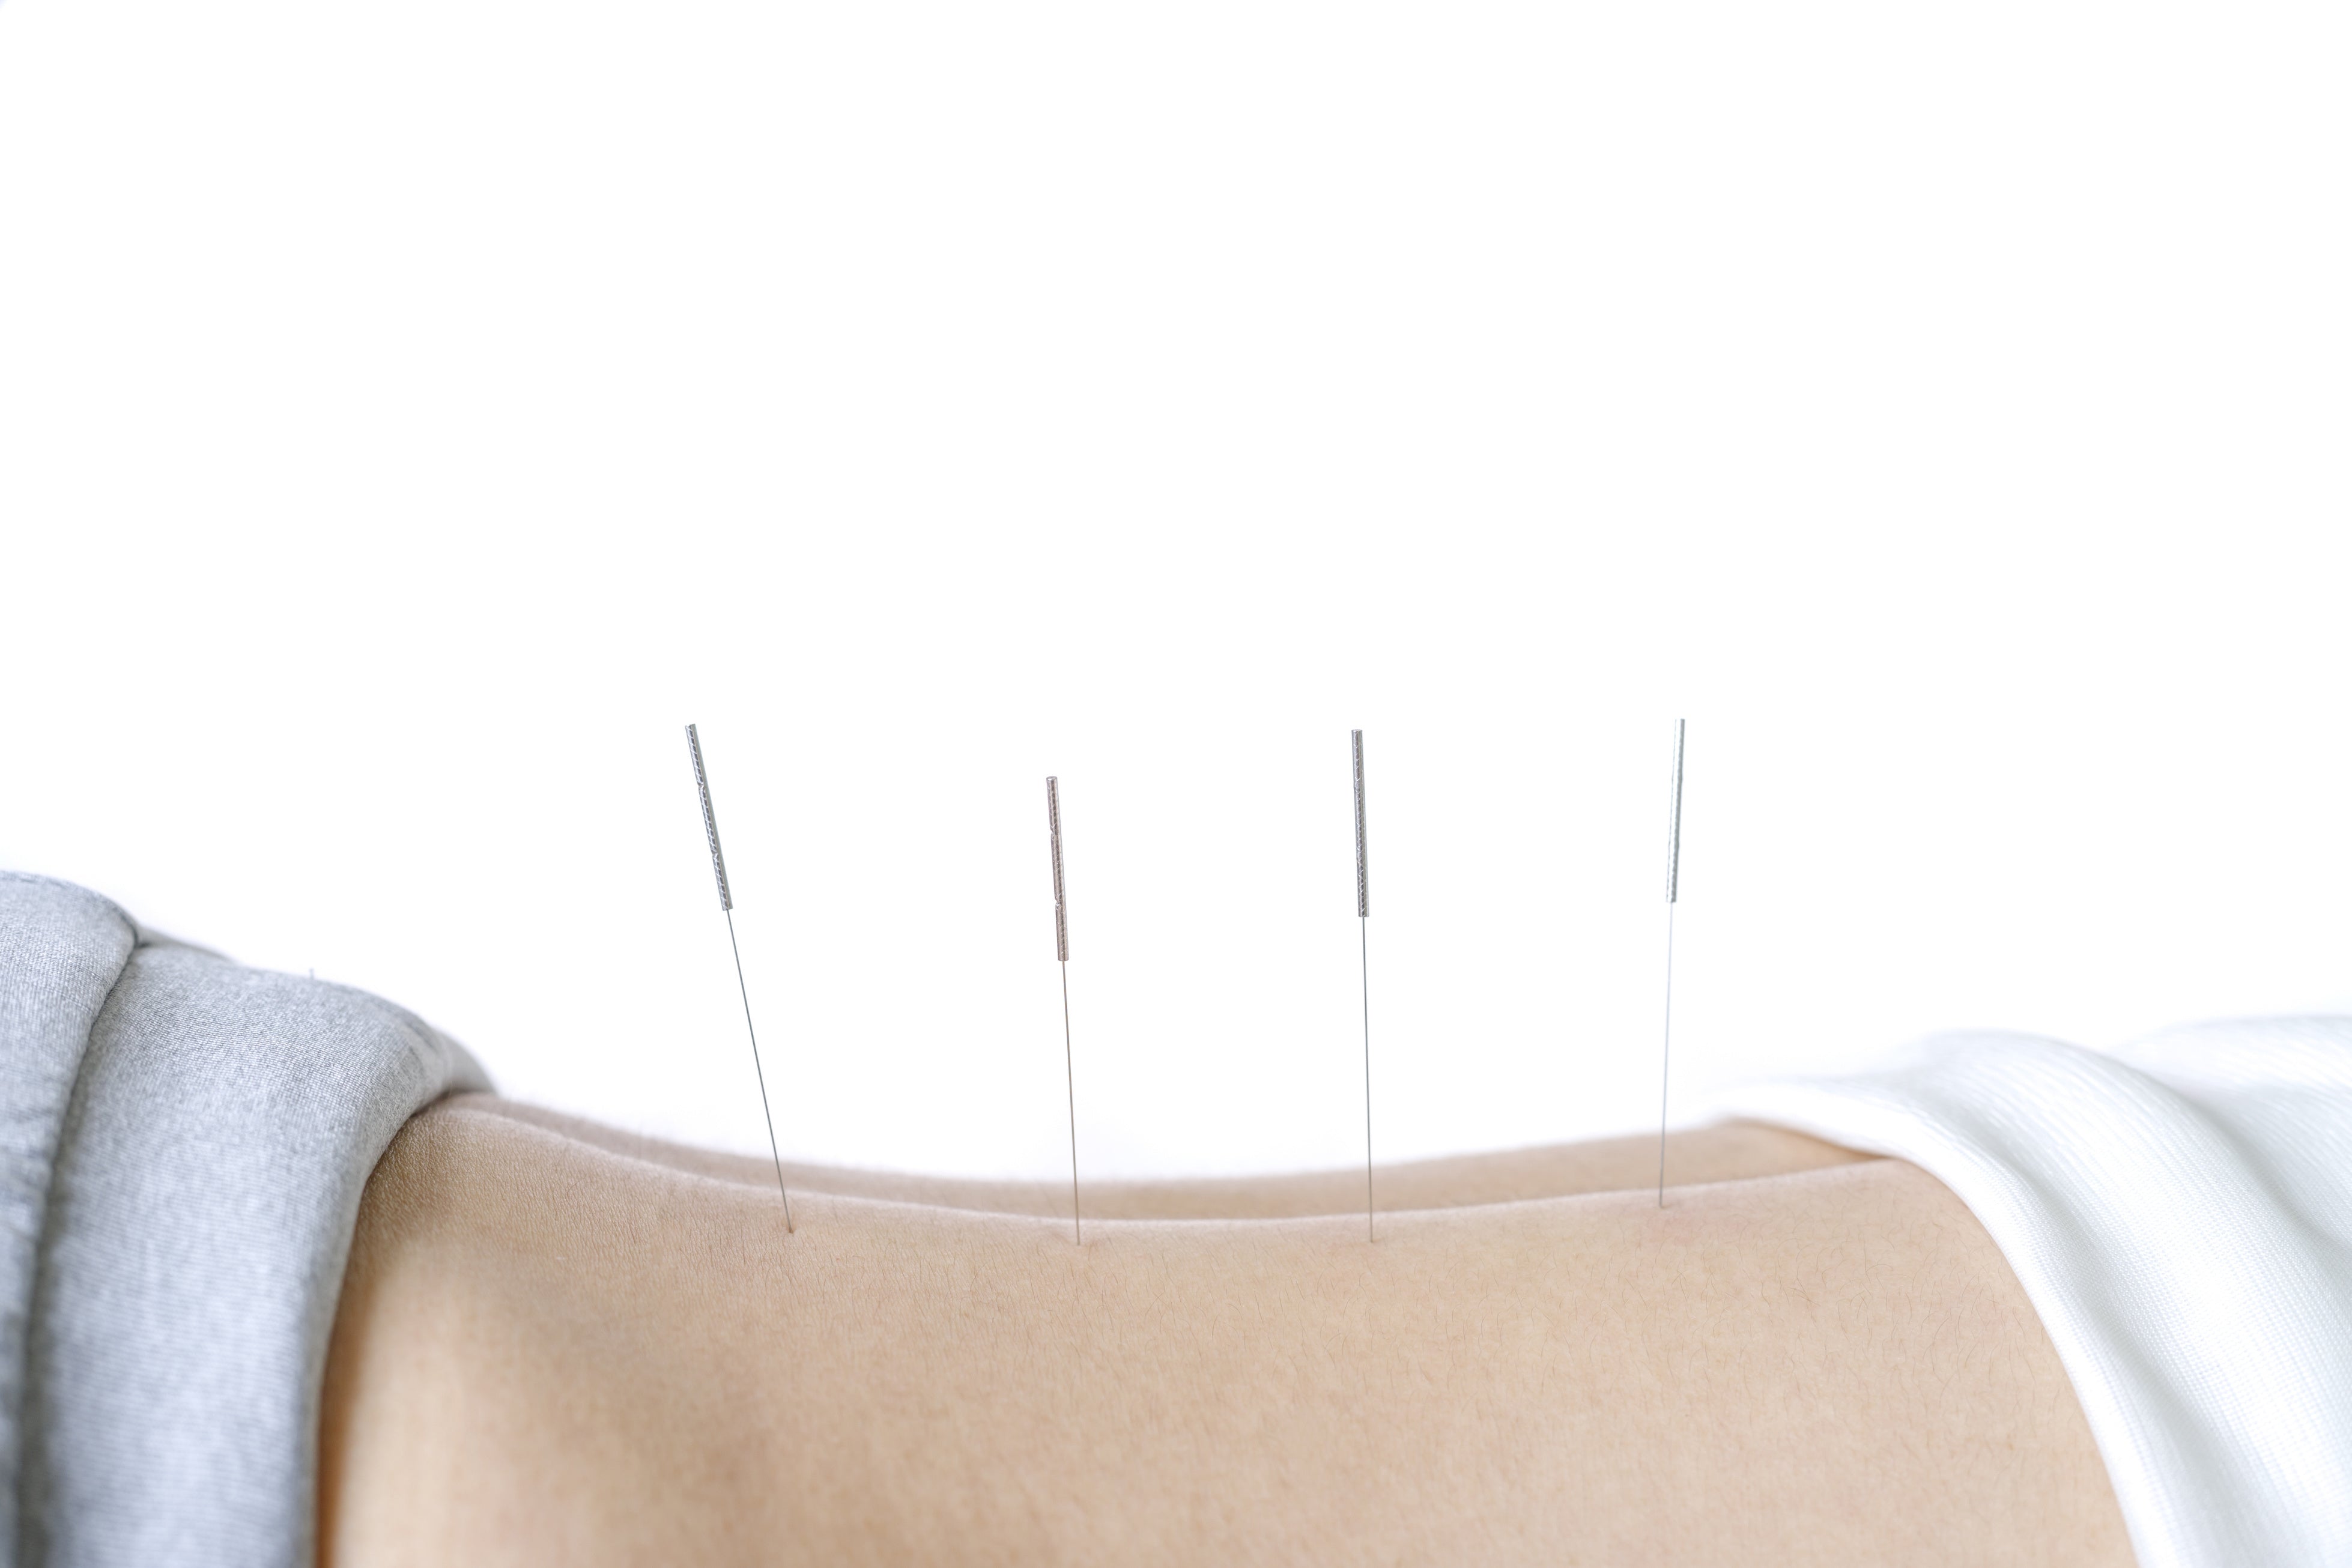 Shop professional acupuncture needles at lierre